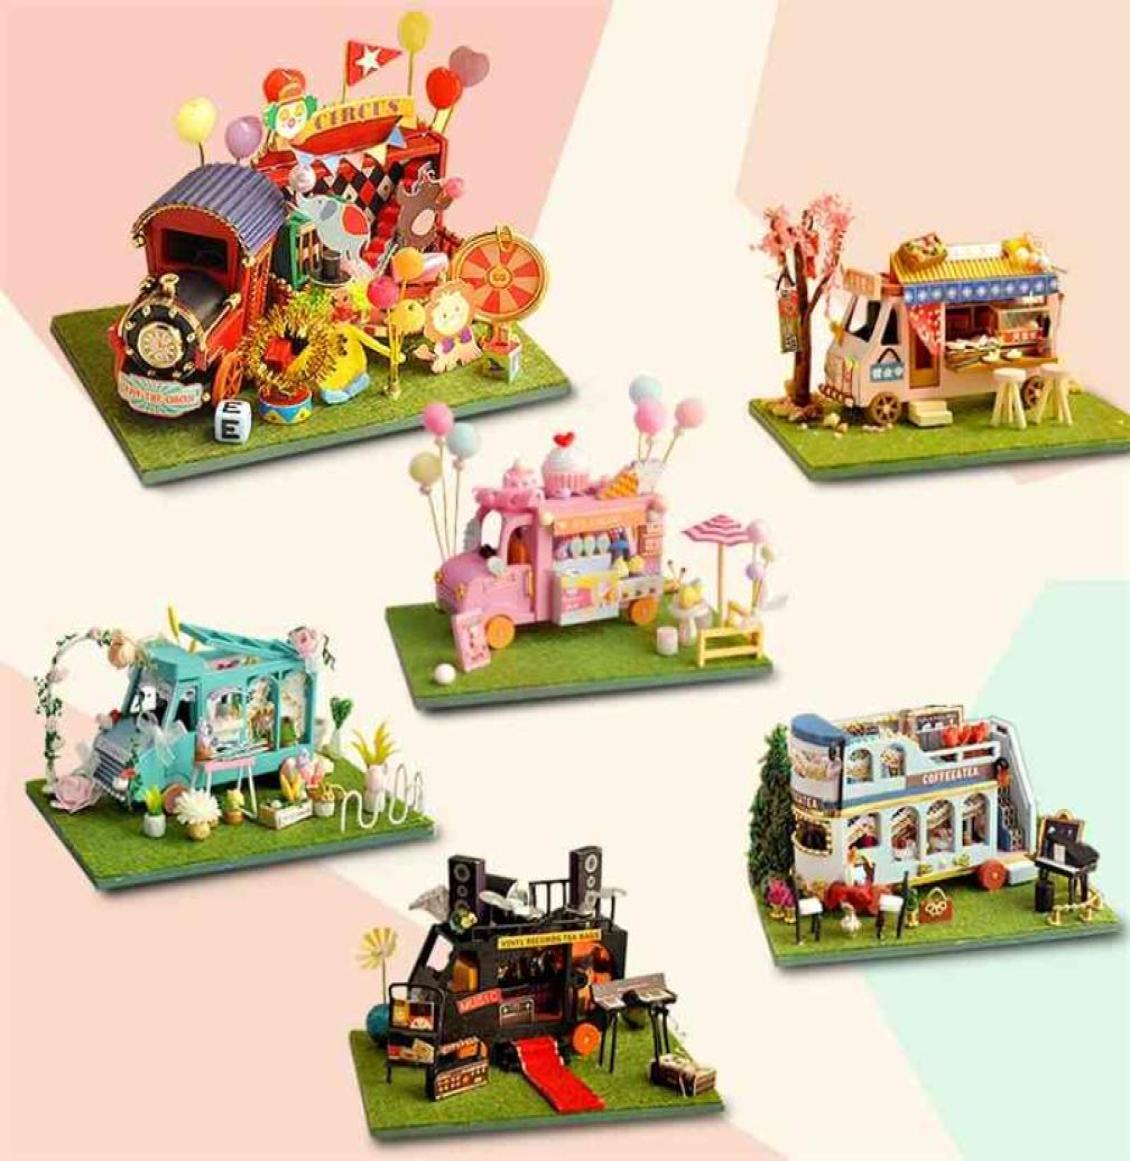 

Cutebee DIY DollHouse Wooden Doll Houses Miniature Dollhouse Furniture Kit Toys for Children Year Christmas Gift Casa 2108124146521, Clear